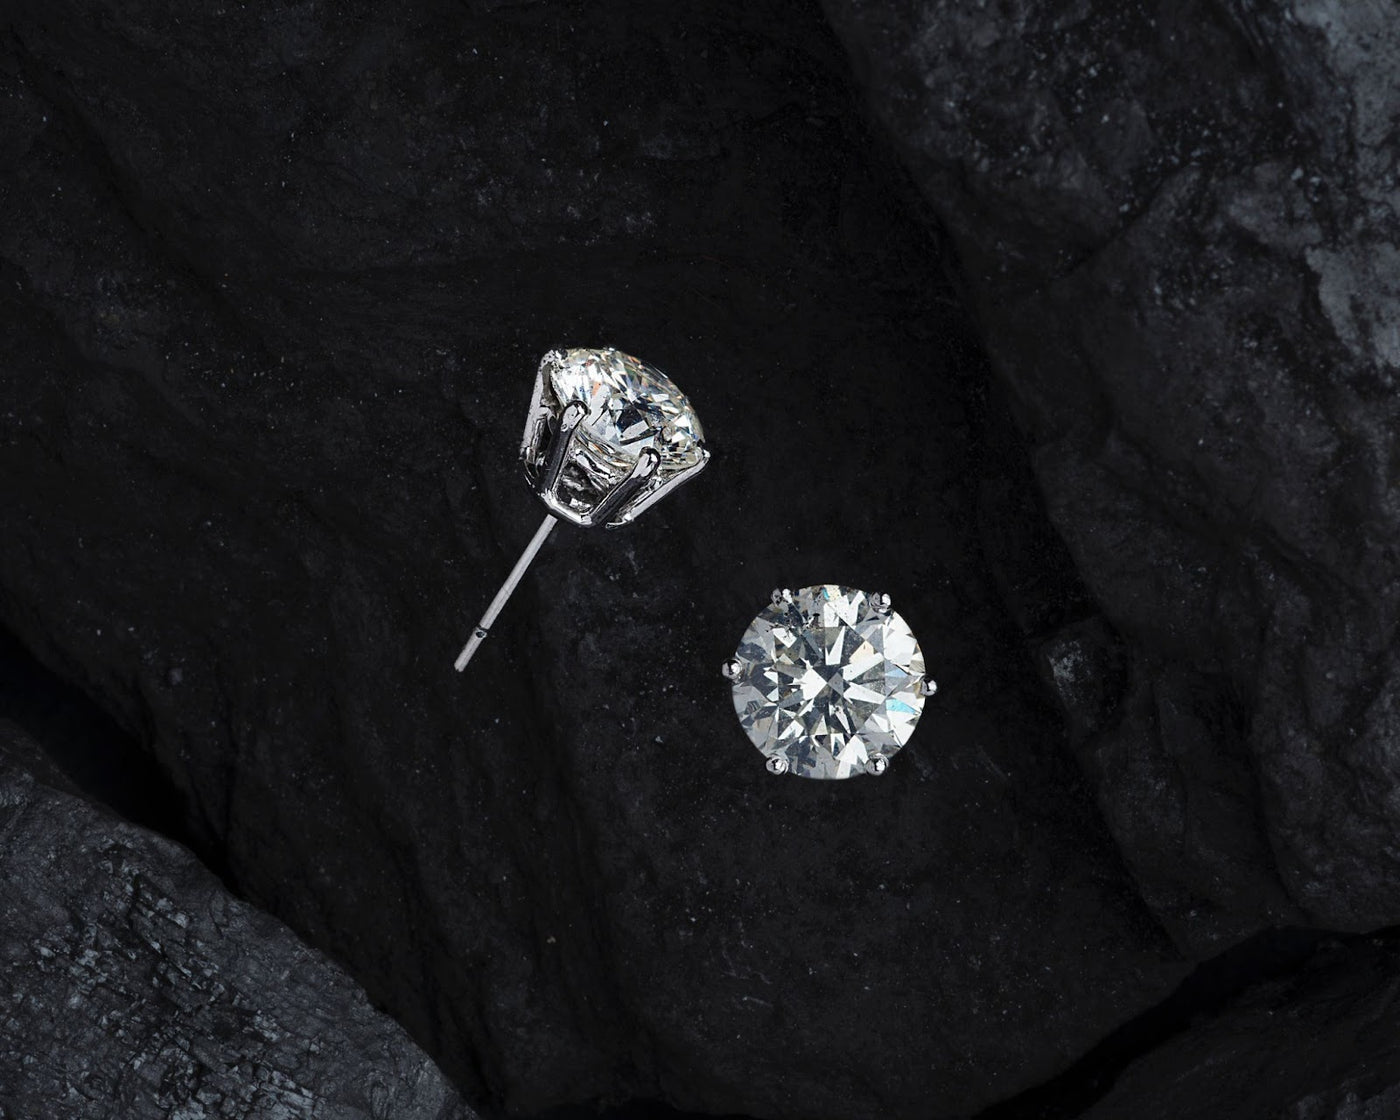 Two lab-grown white diamond earrings to disprove myths about lab-grown diamonds